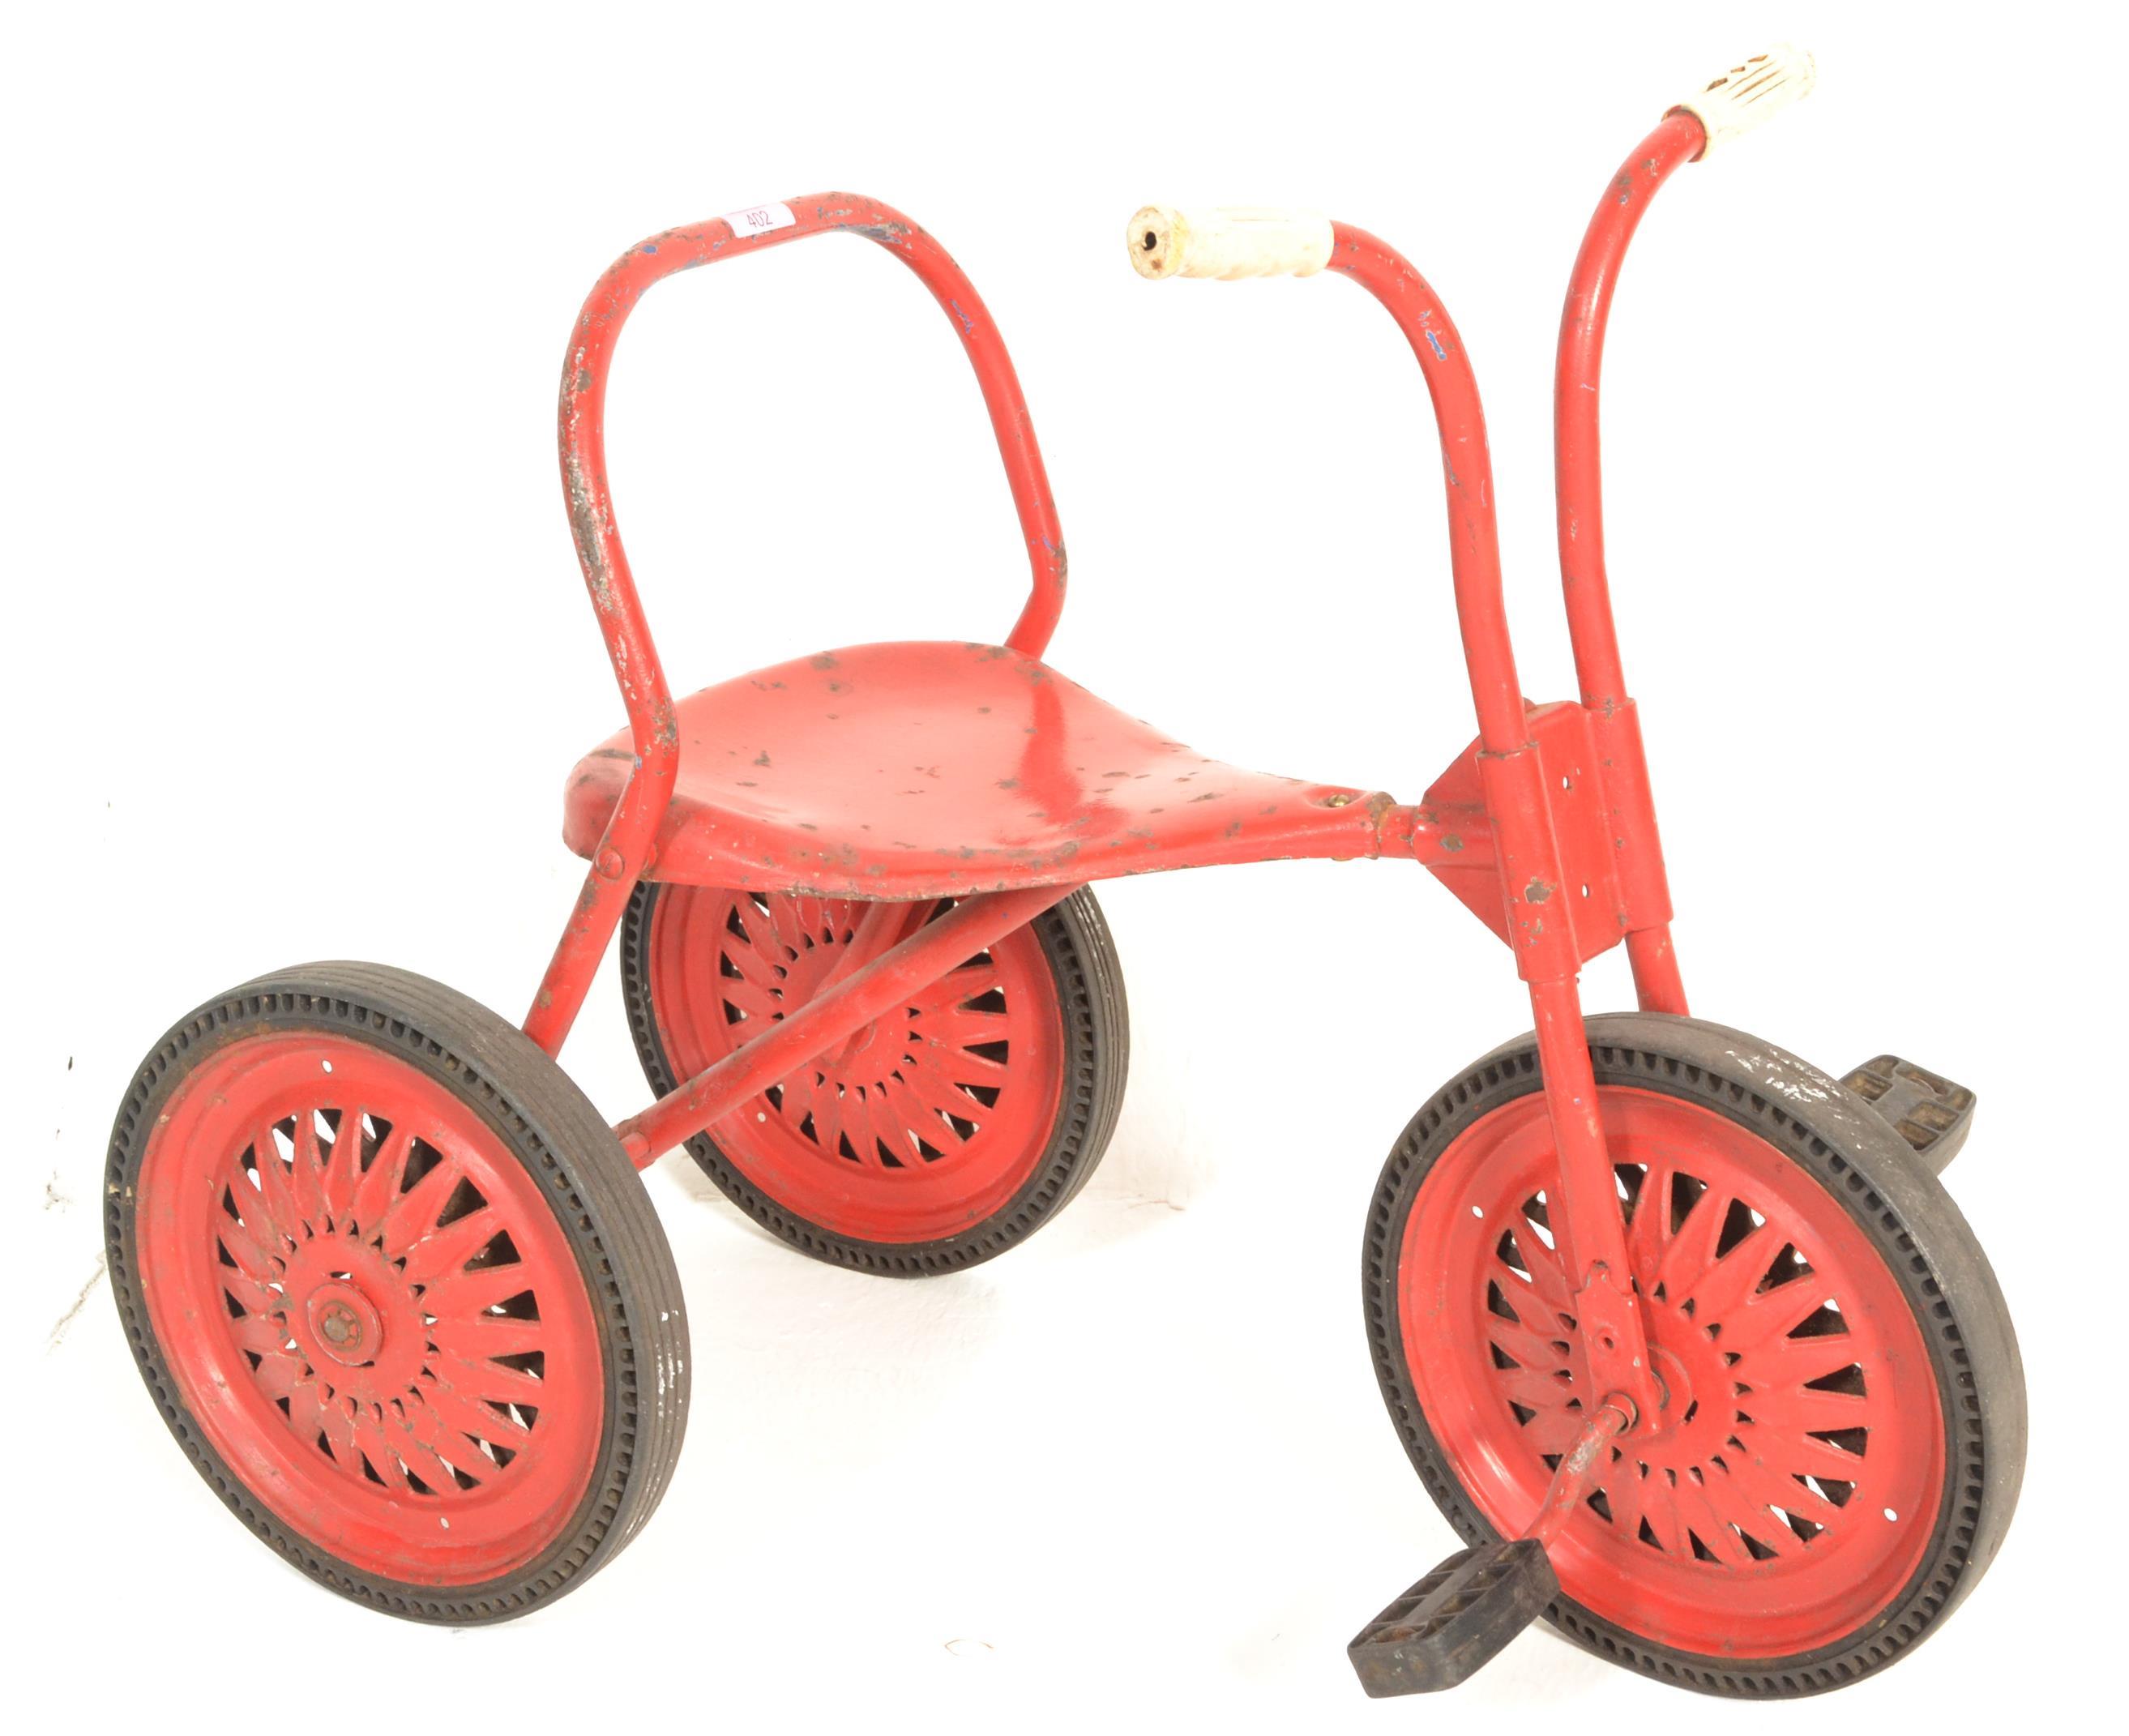 A VINTAGE TRI-ANG RIDE ALONG CHILD'S TRIKE WITH SOLID RUBBER TYRES